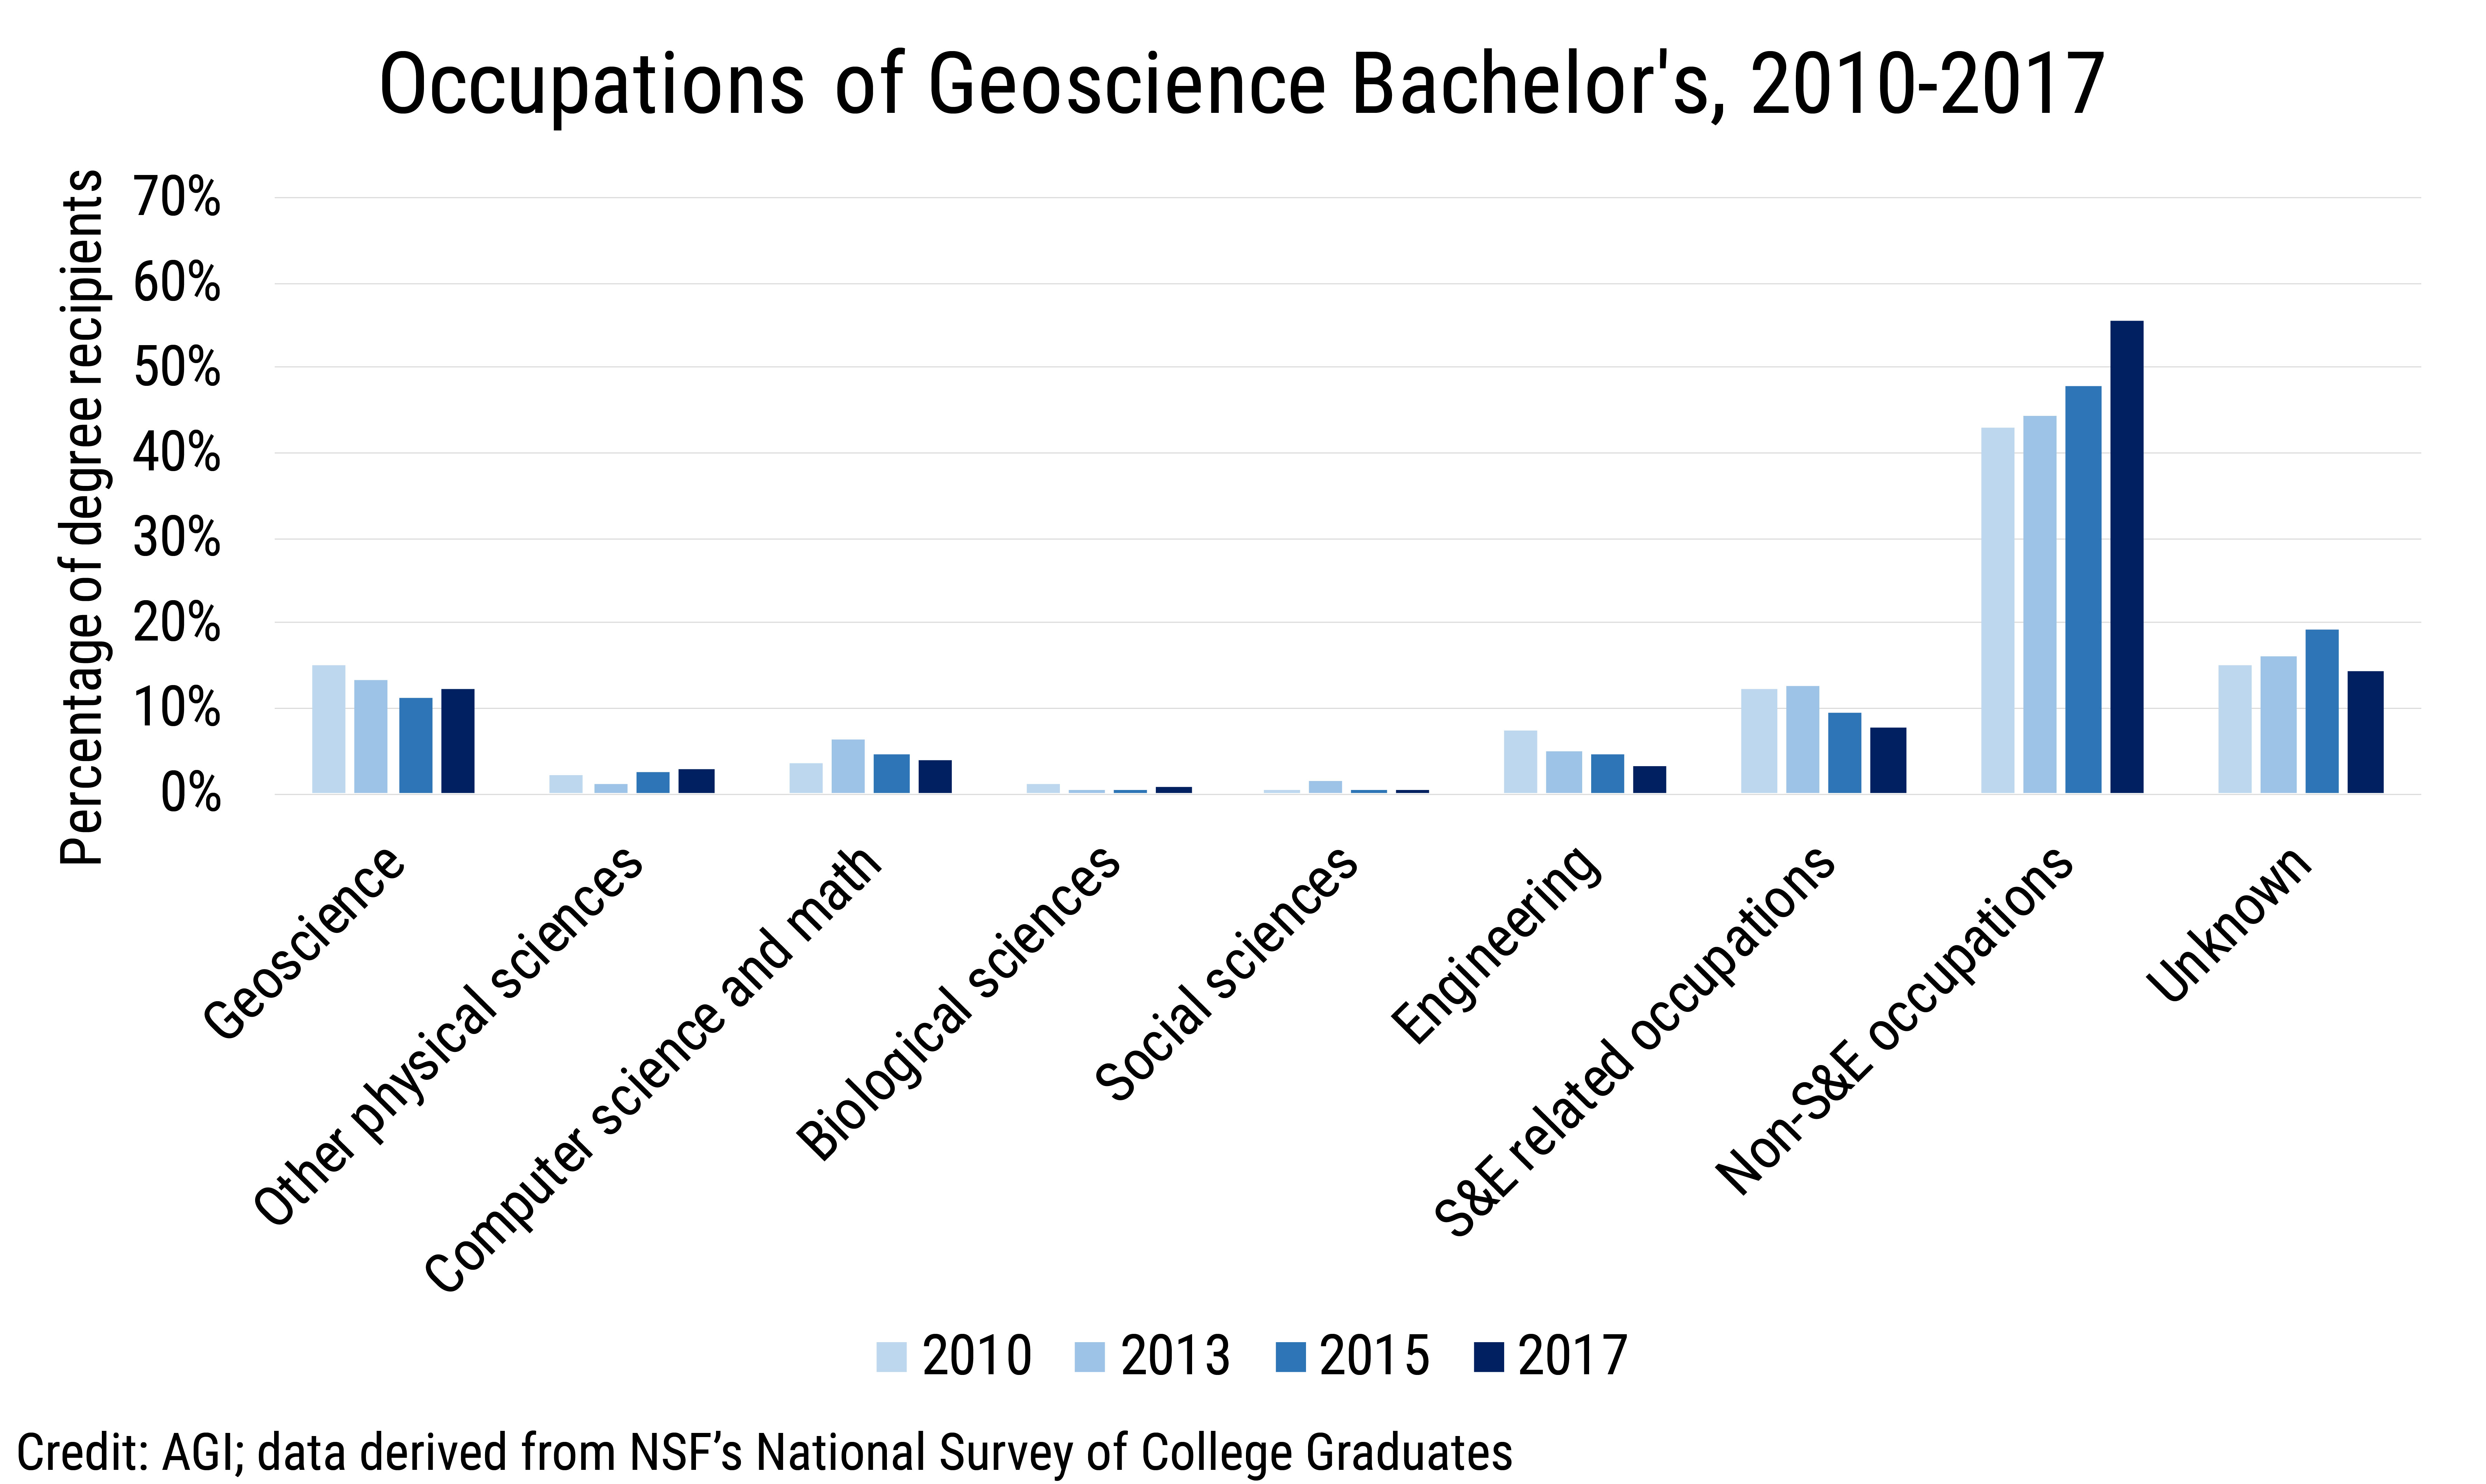 Data Brief 2019-014 chart 01: Occupations of Geoscience Bachelor's, 2010-2017 (credit: AGI; data derived from NSF NSCG)